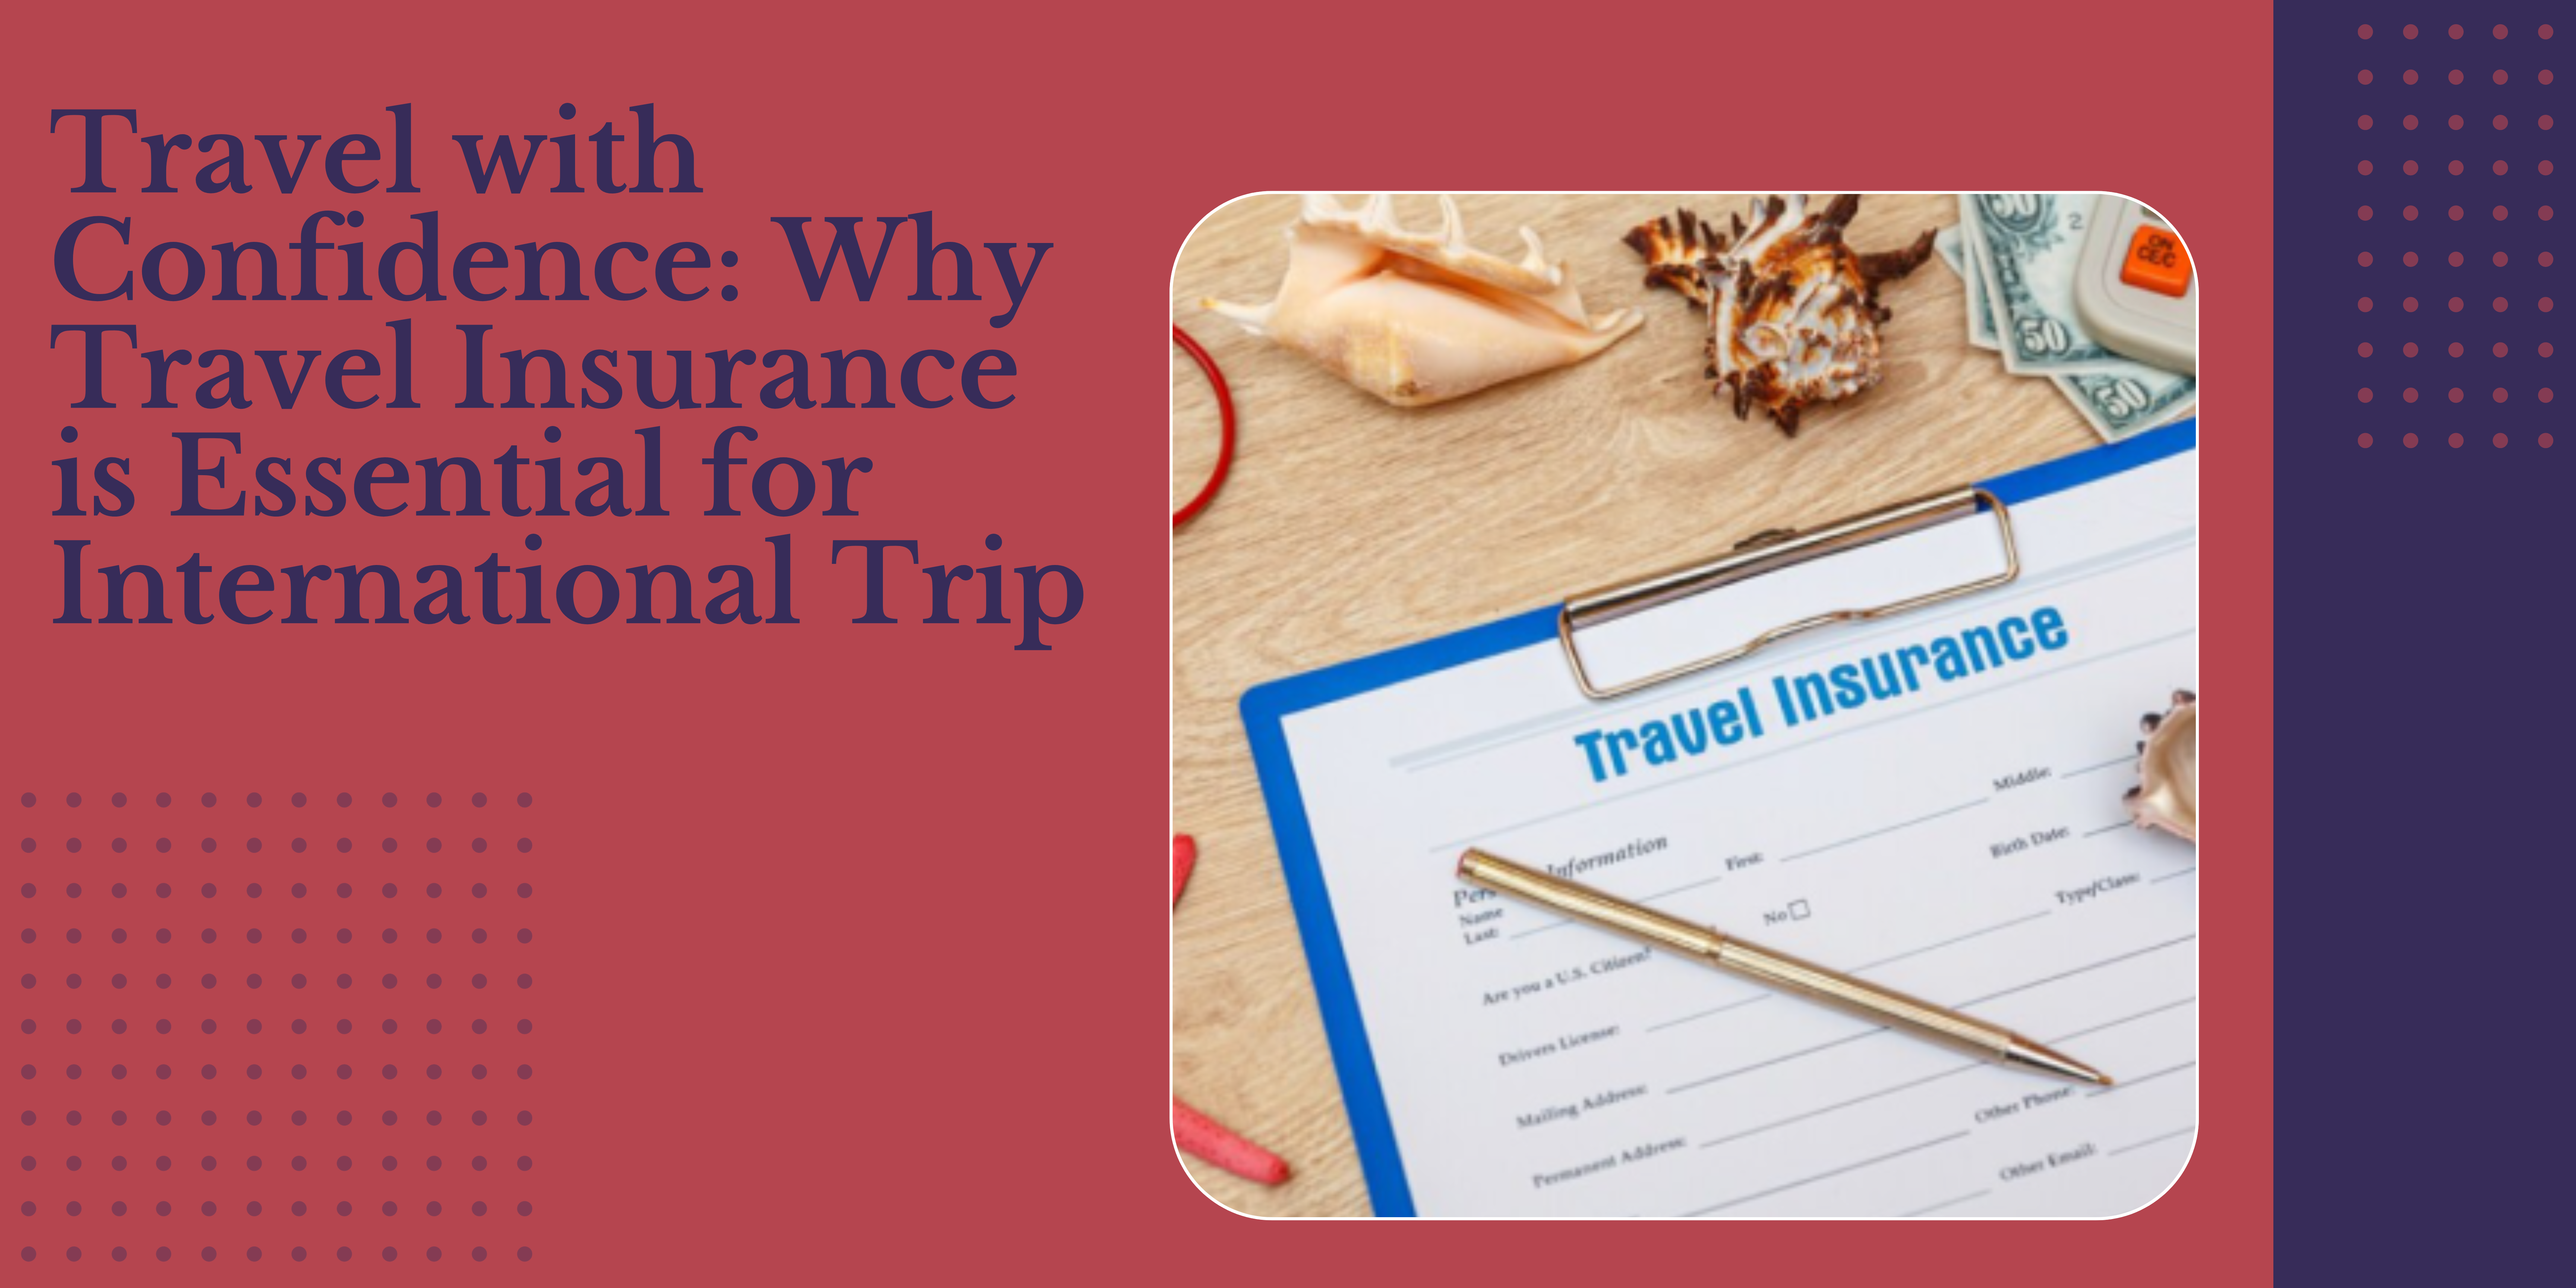 Travel with Confidence: Why Travel Insurance is Essential for International Trip